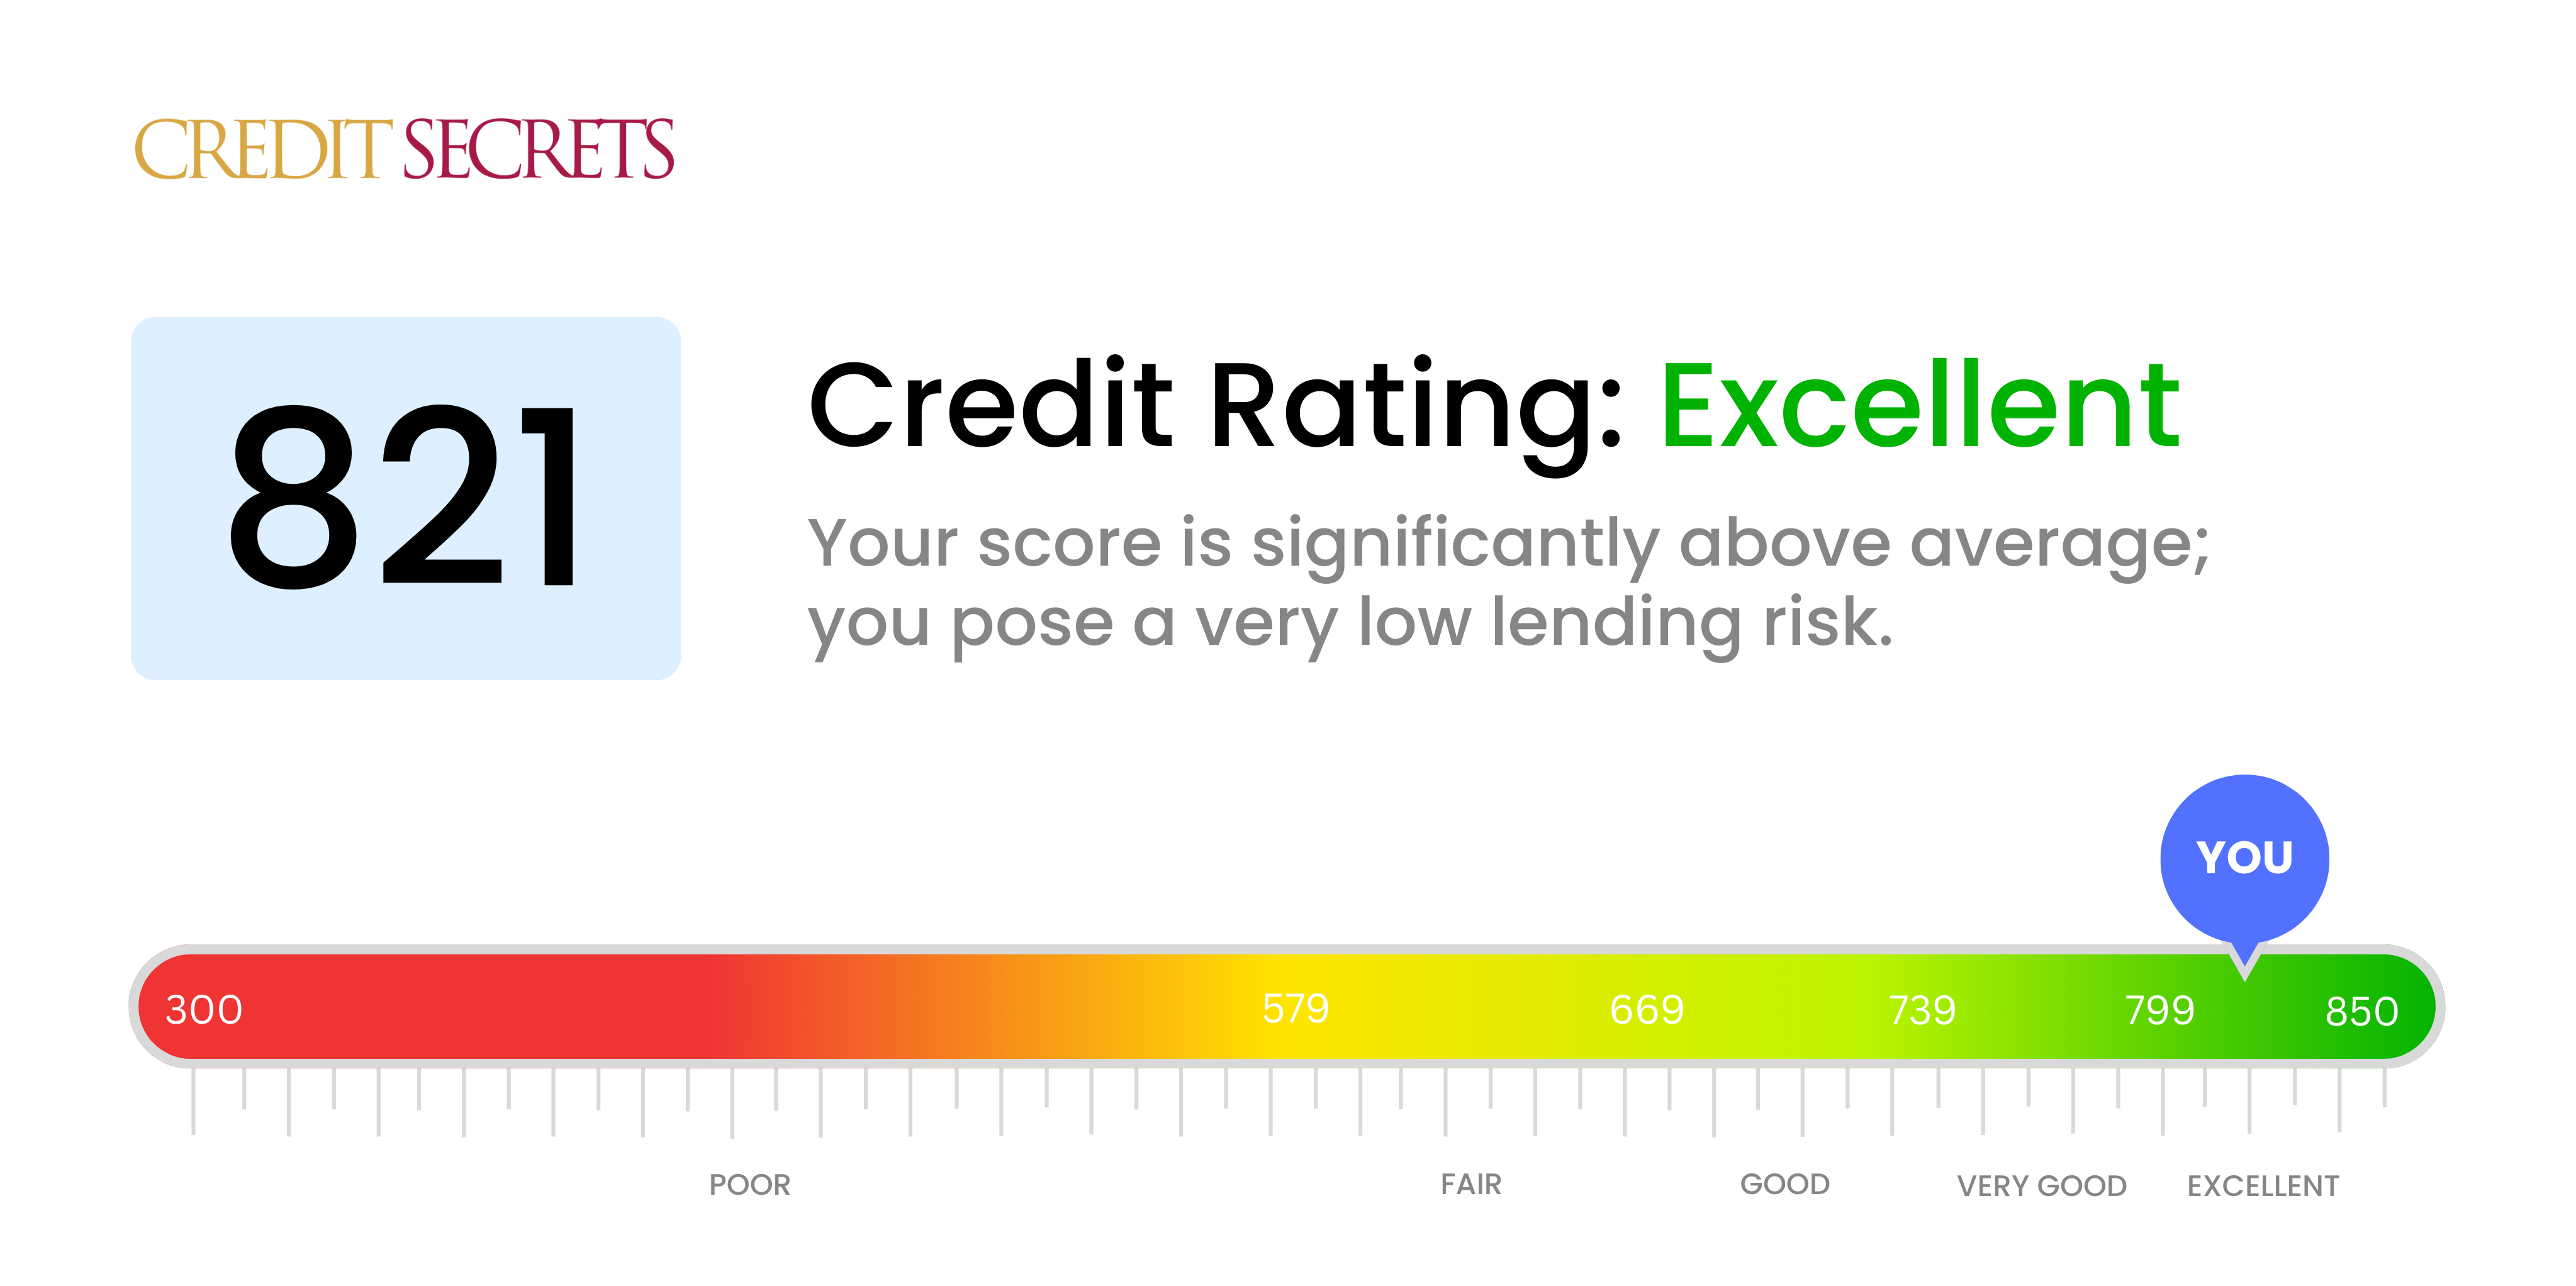 Is 821 a good credit score?